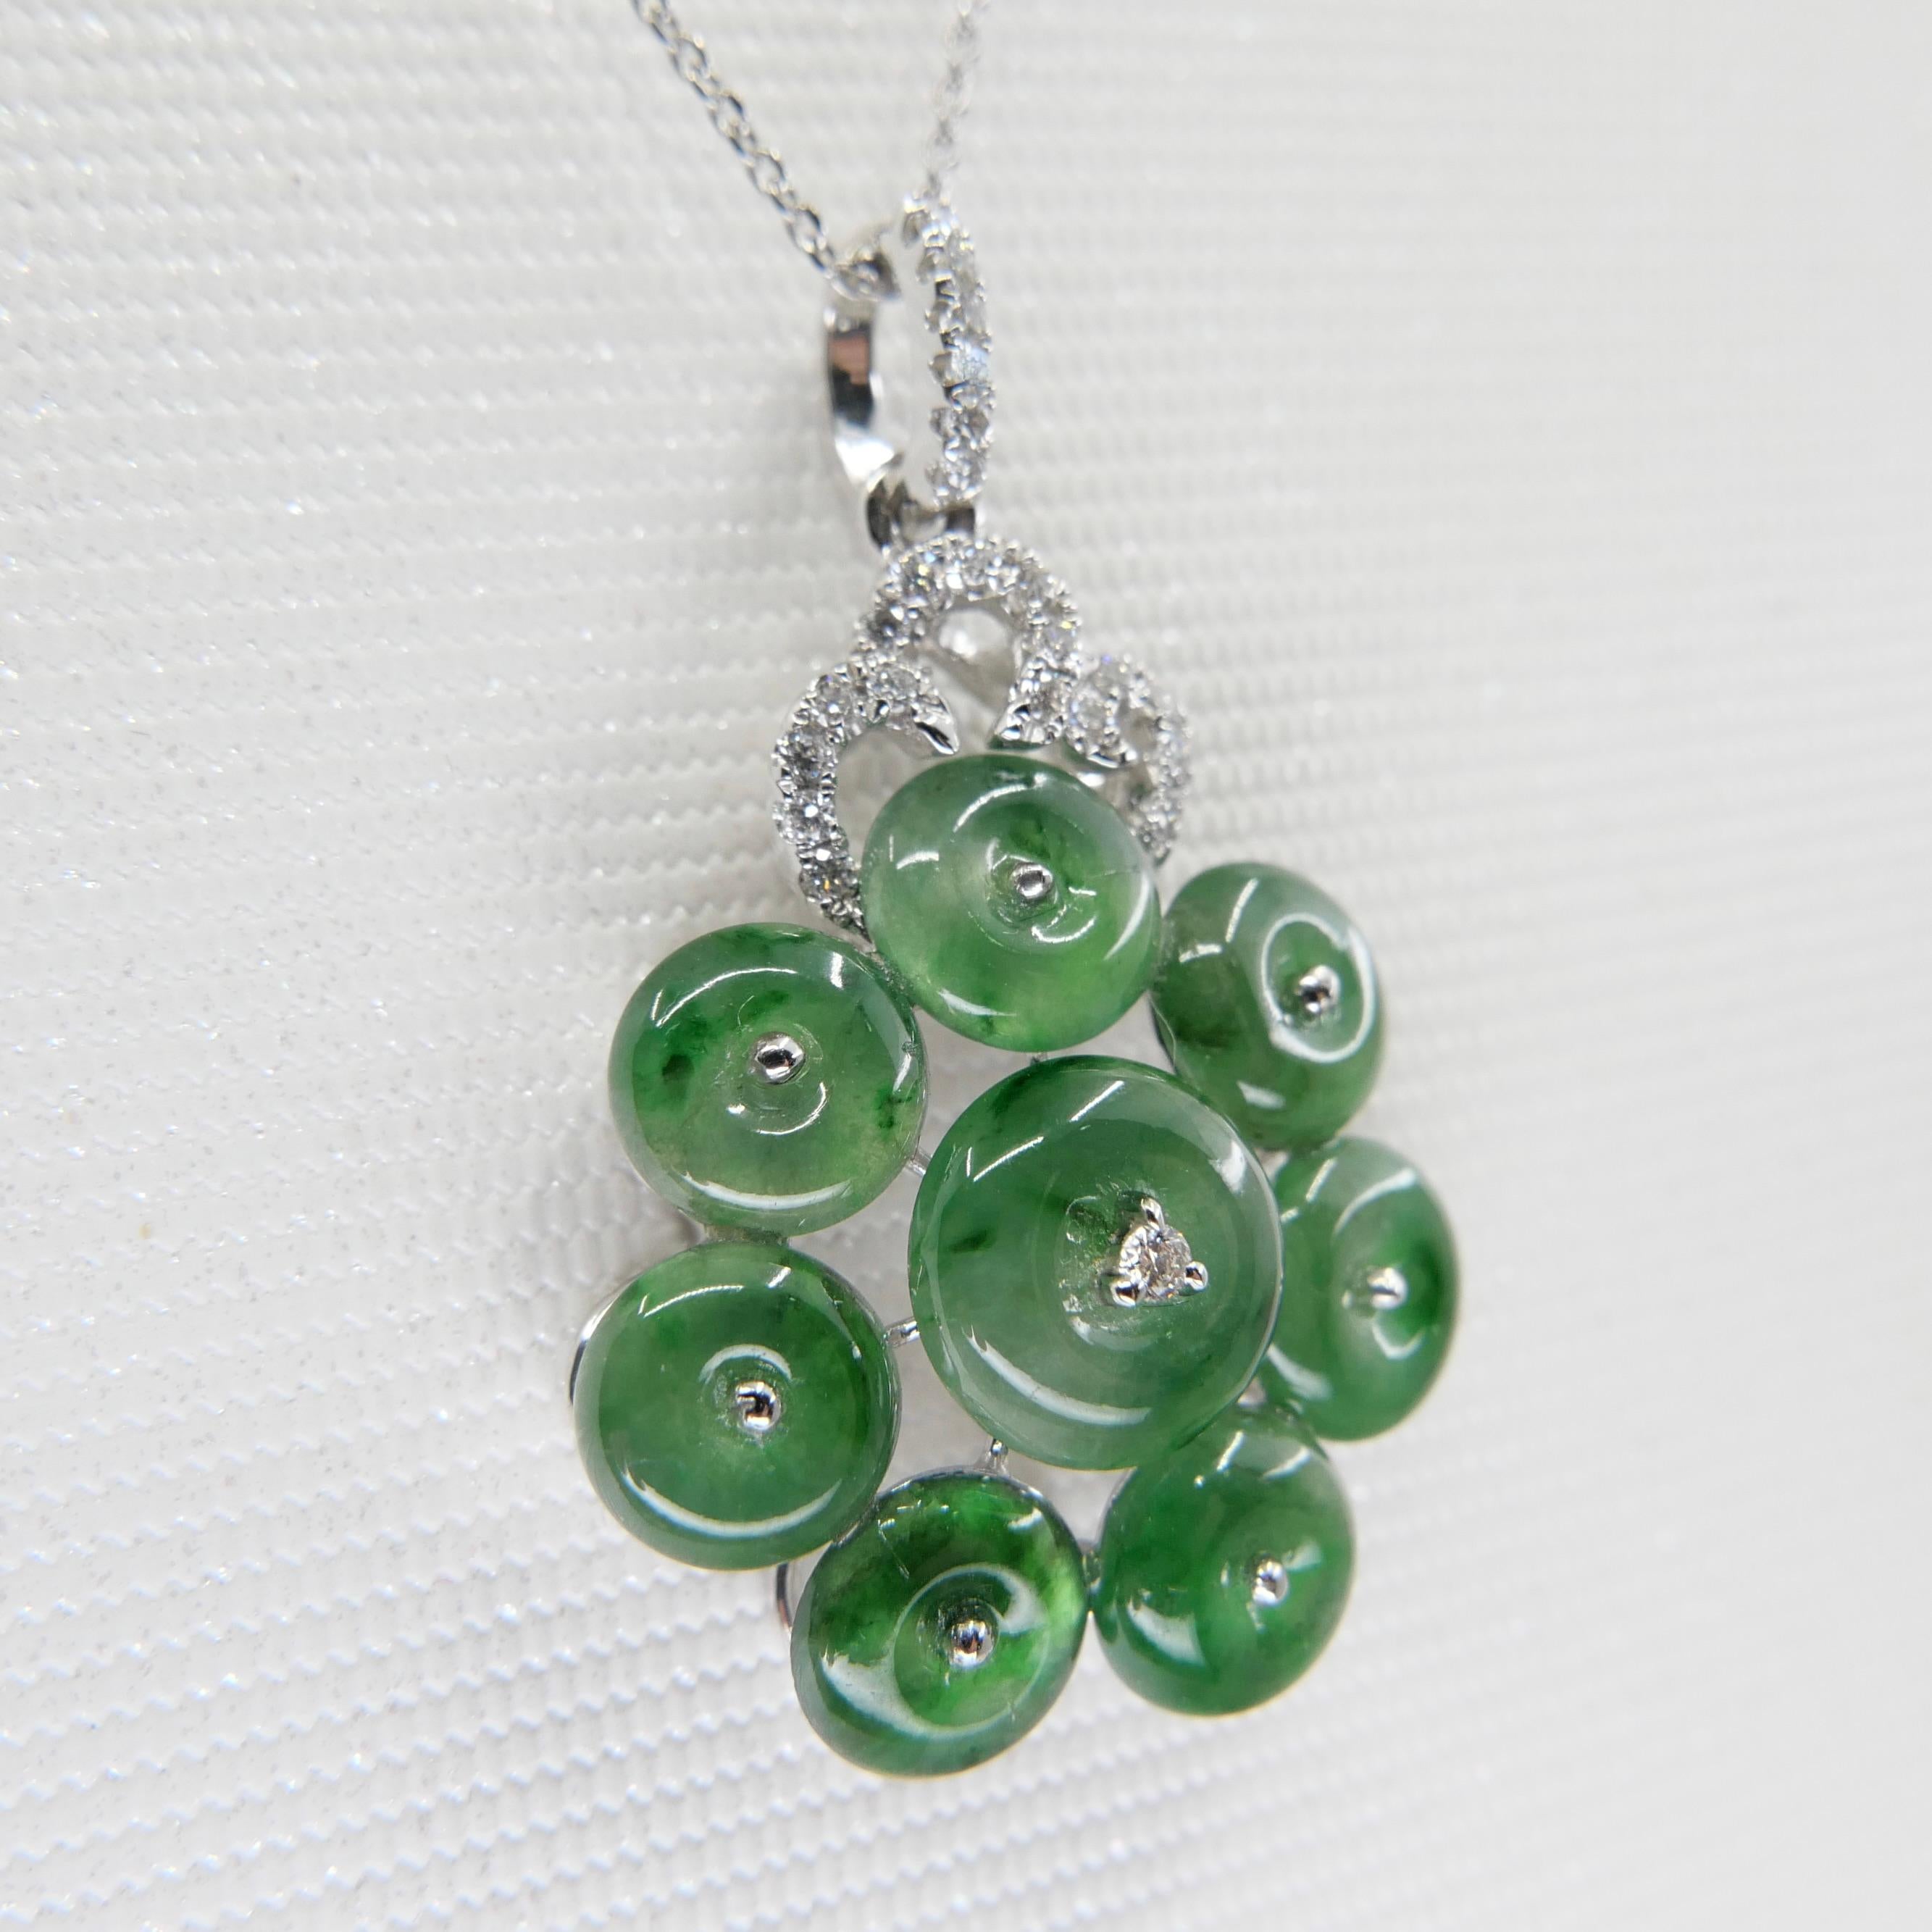 Certified Type A Cluster Icy Jade Discs & Diamond Pendant, High Translucency For Sale 2